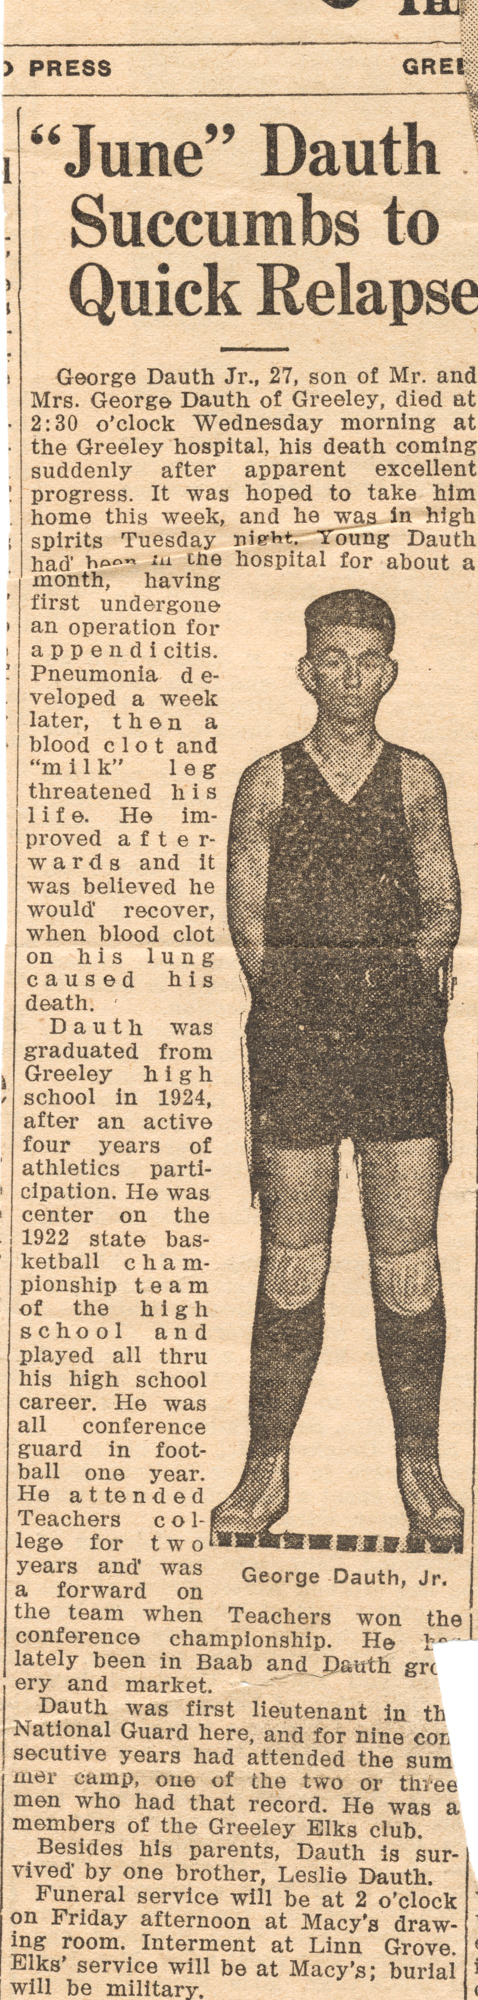 Dauth Family Archive - 1932-05-18 - Greeley Daily Tribune - June Dauth Obituary